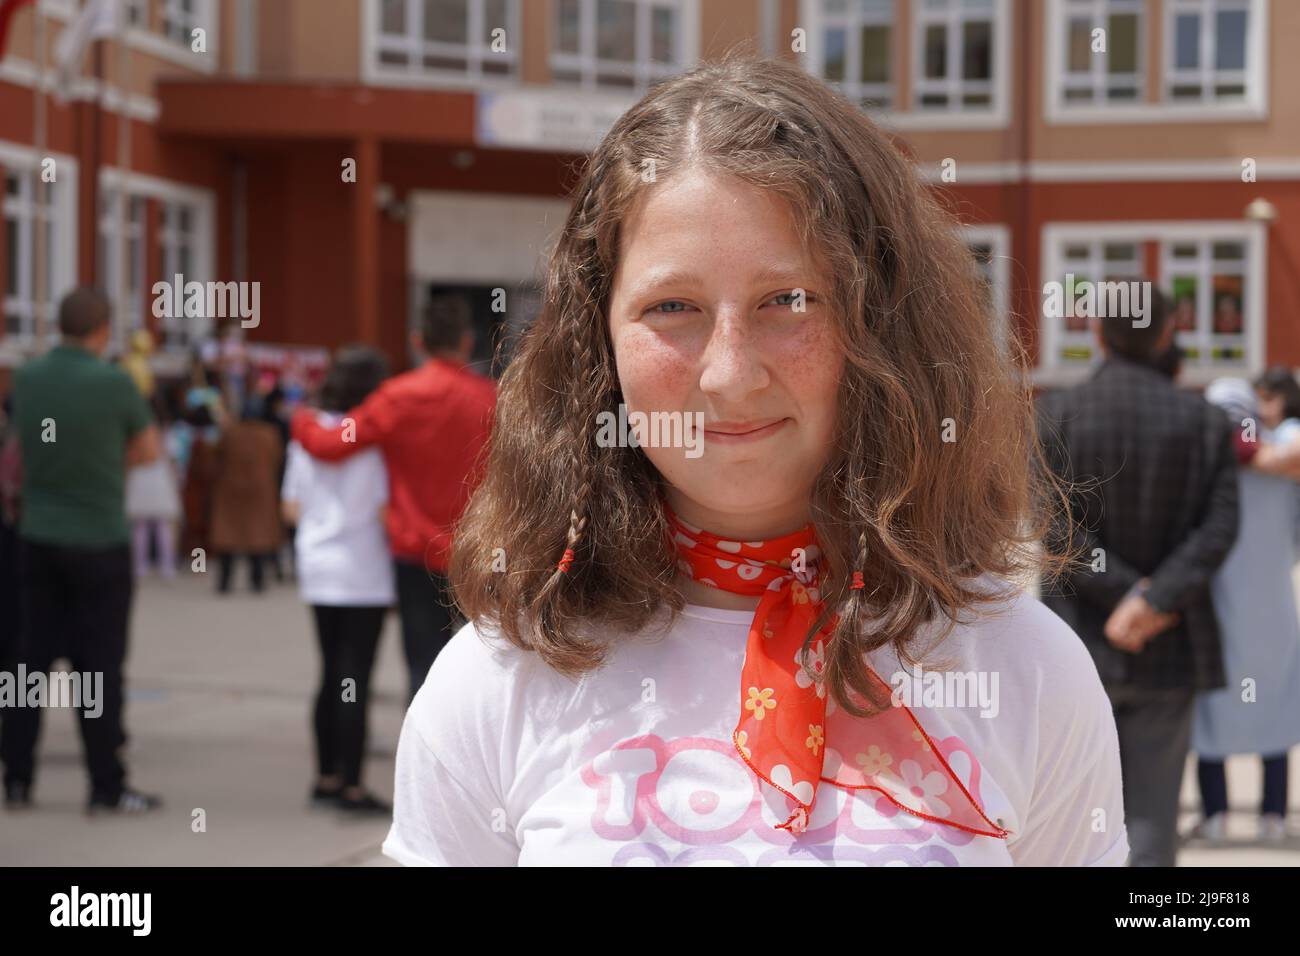 school student girl in white shirt with blue eyes wearing red scarf Stock Photo